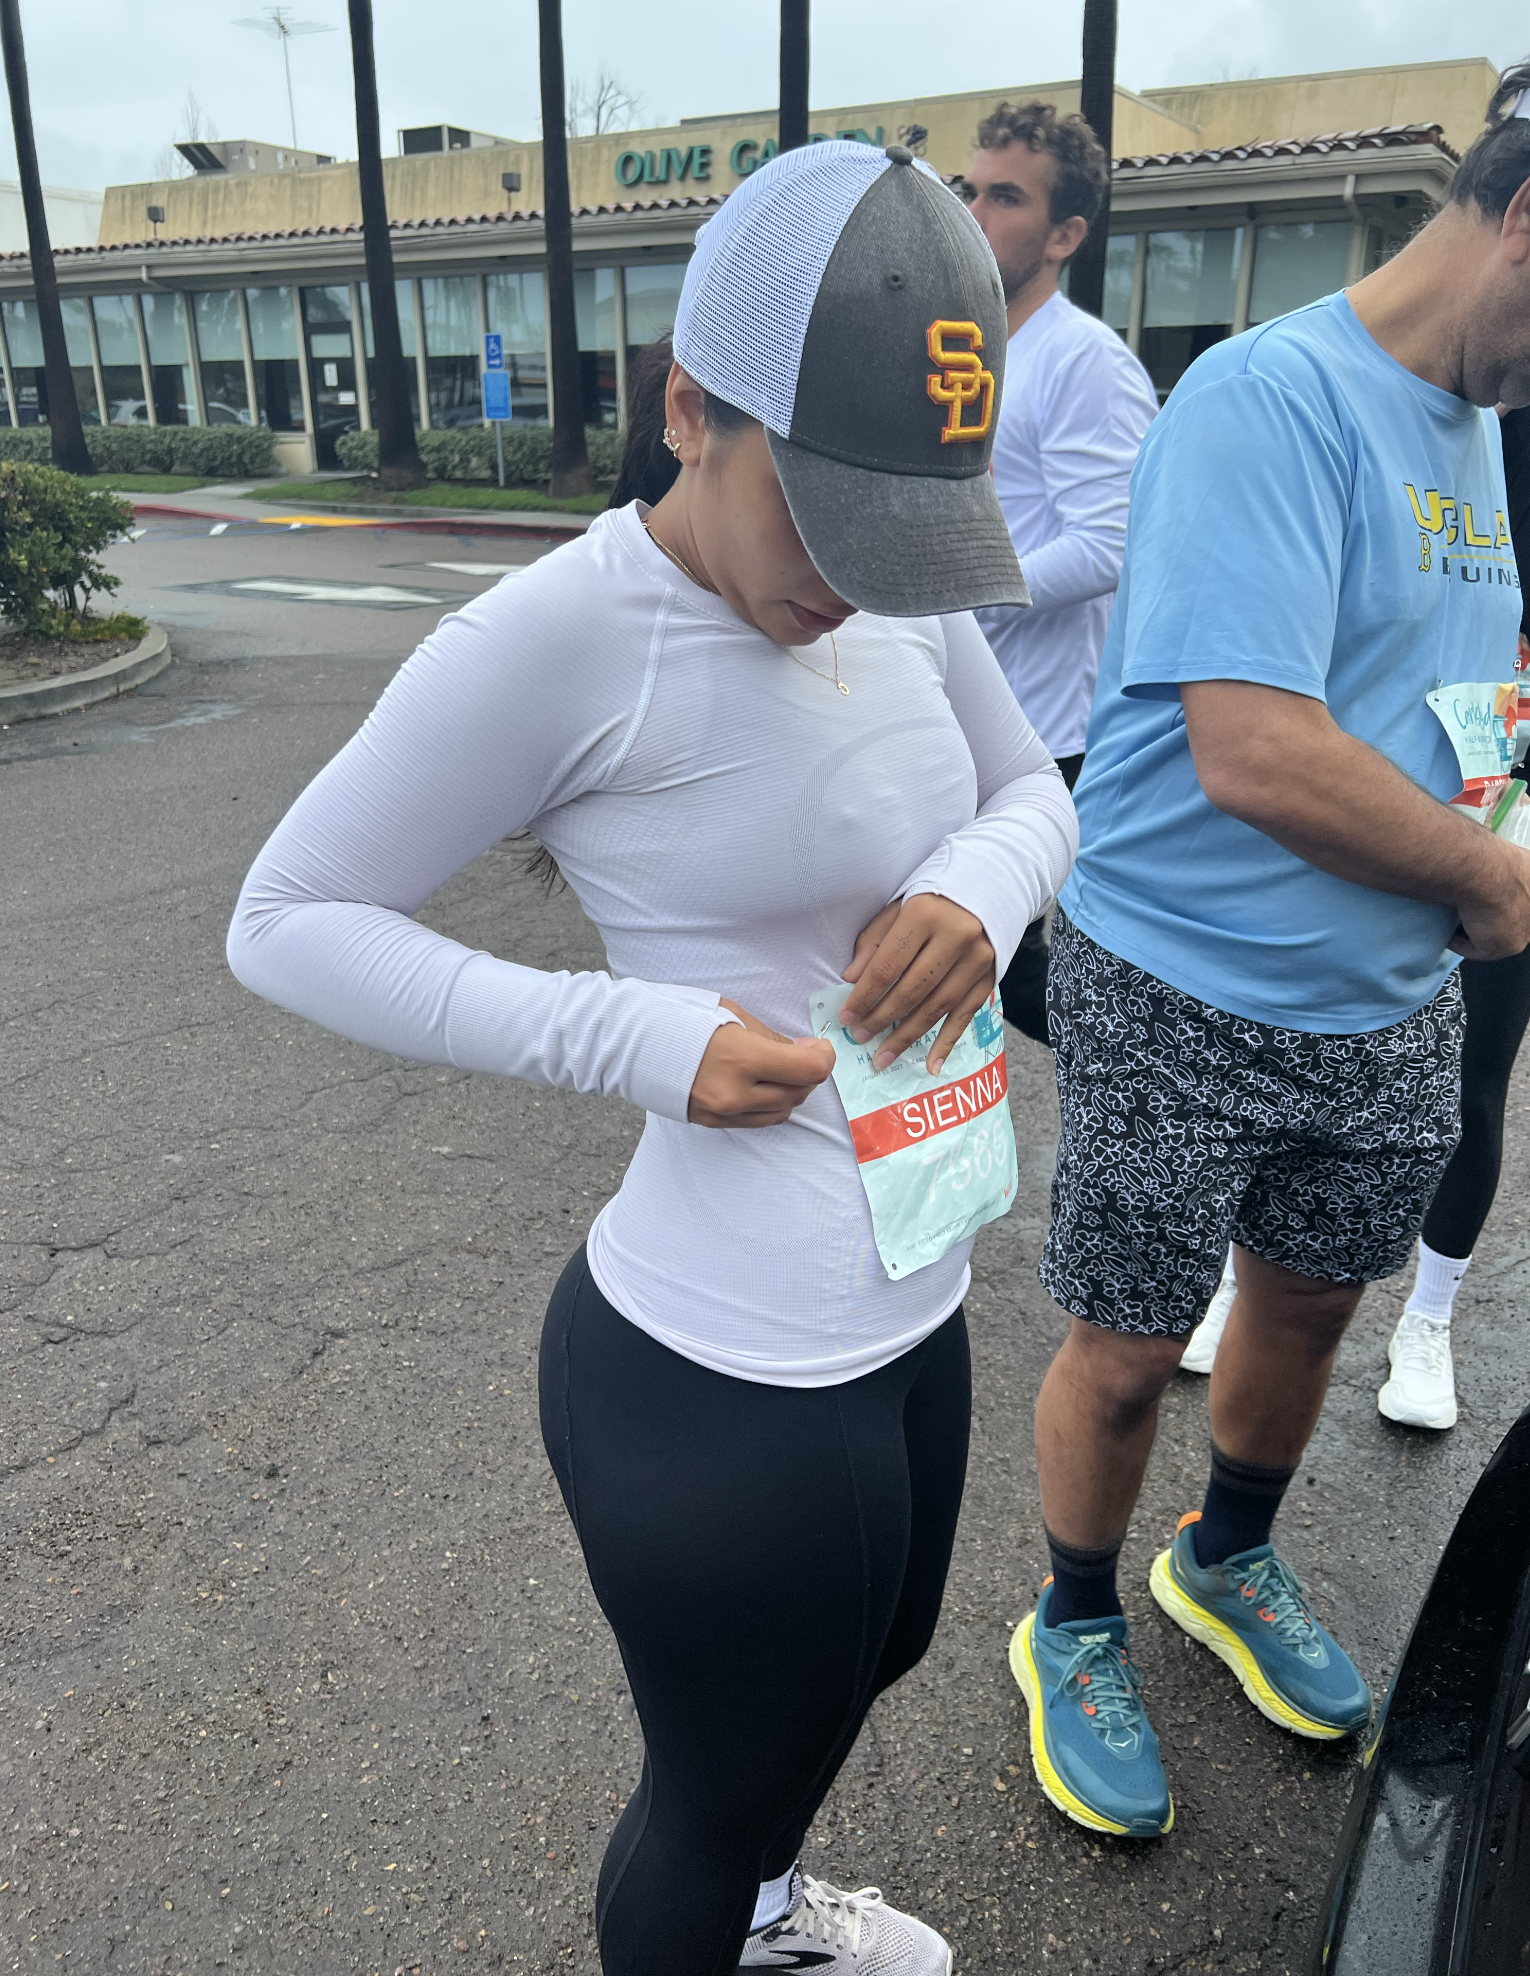 Girl in white long sleeve top and San Diego baseball cap pinning a race bib to her shirt in preparation for a marathon